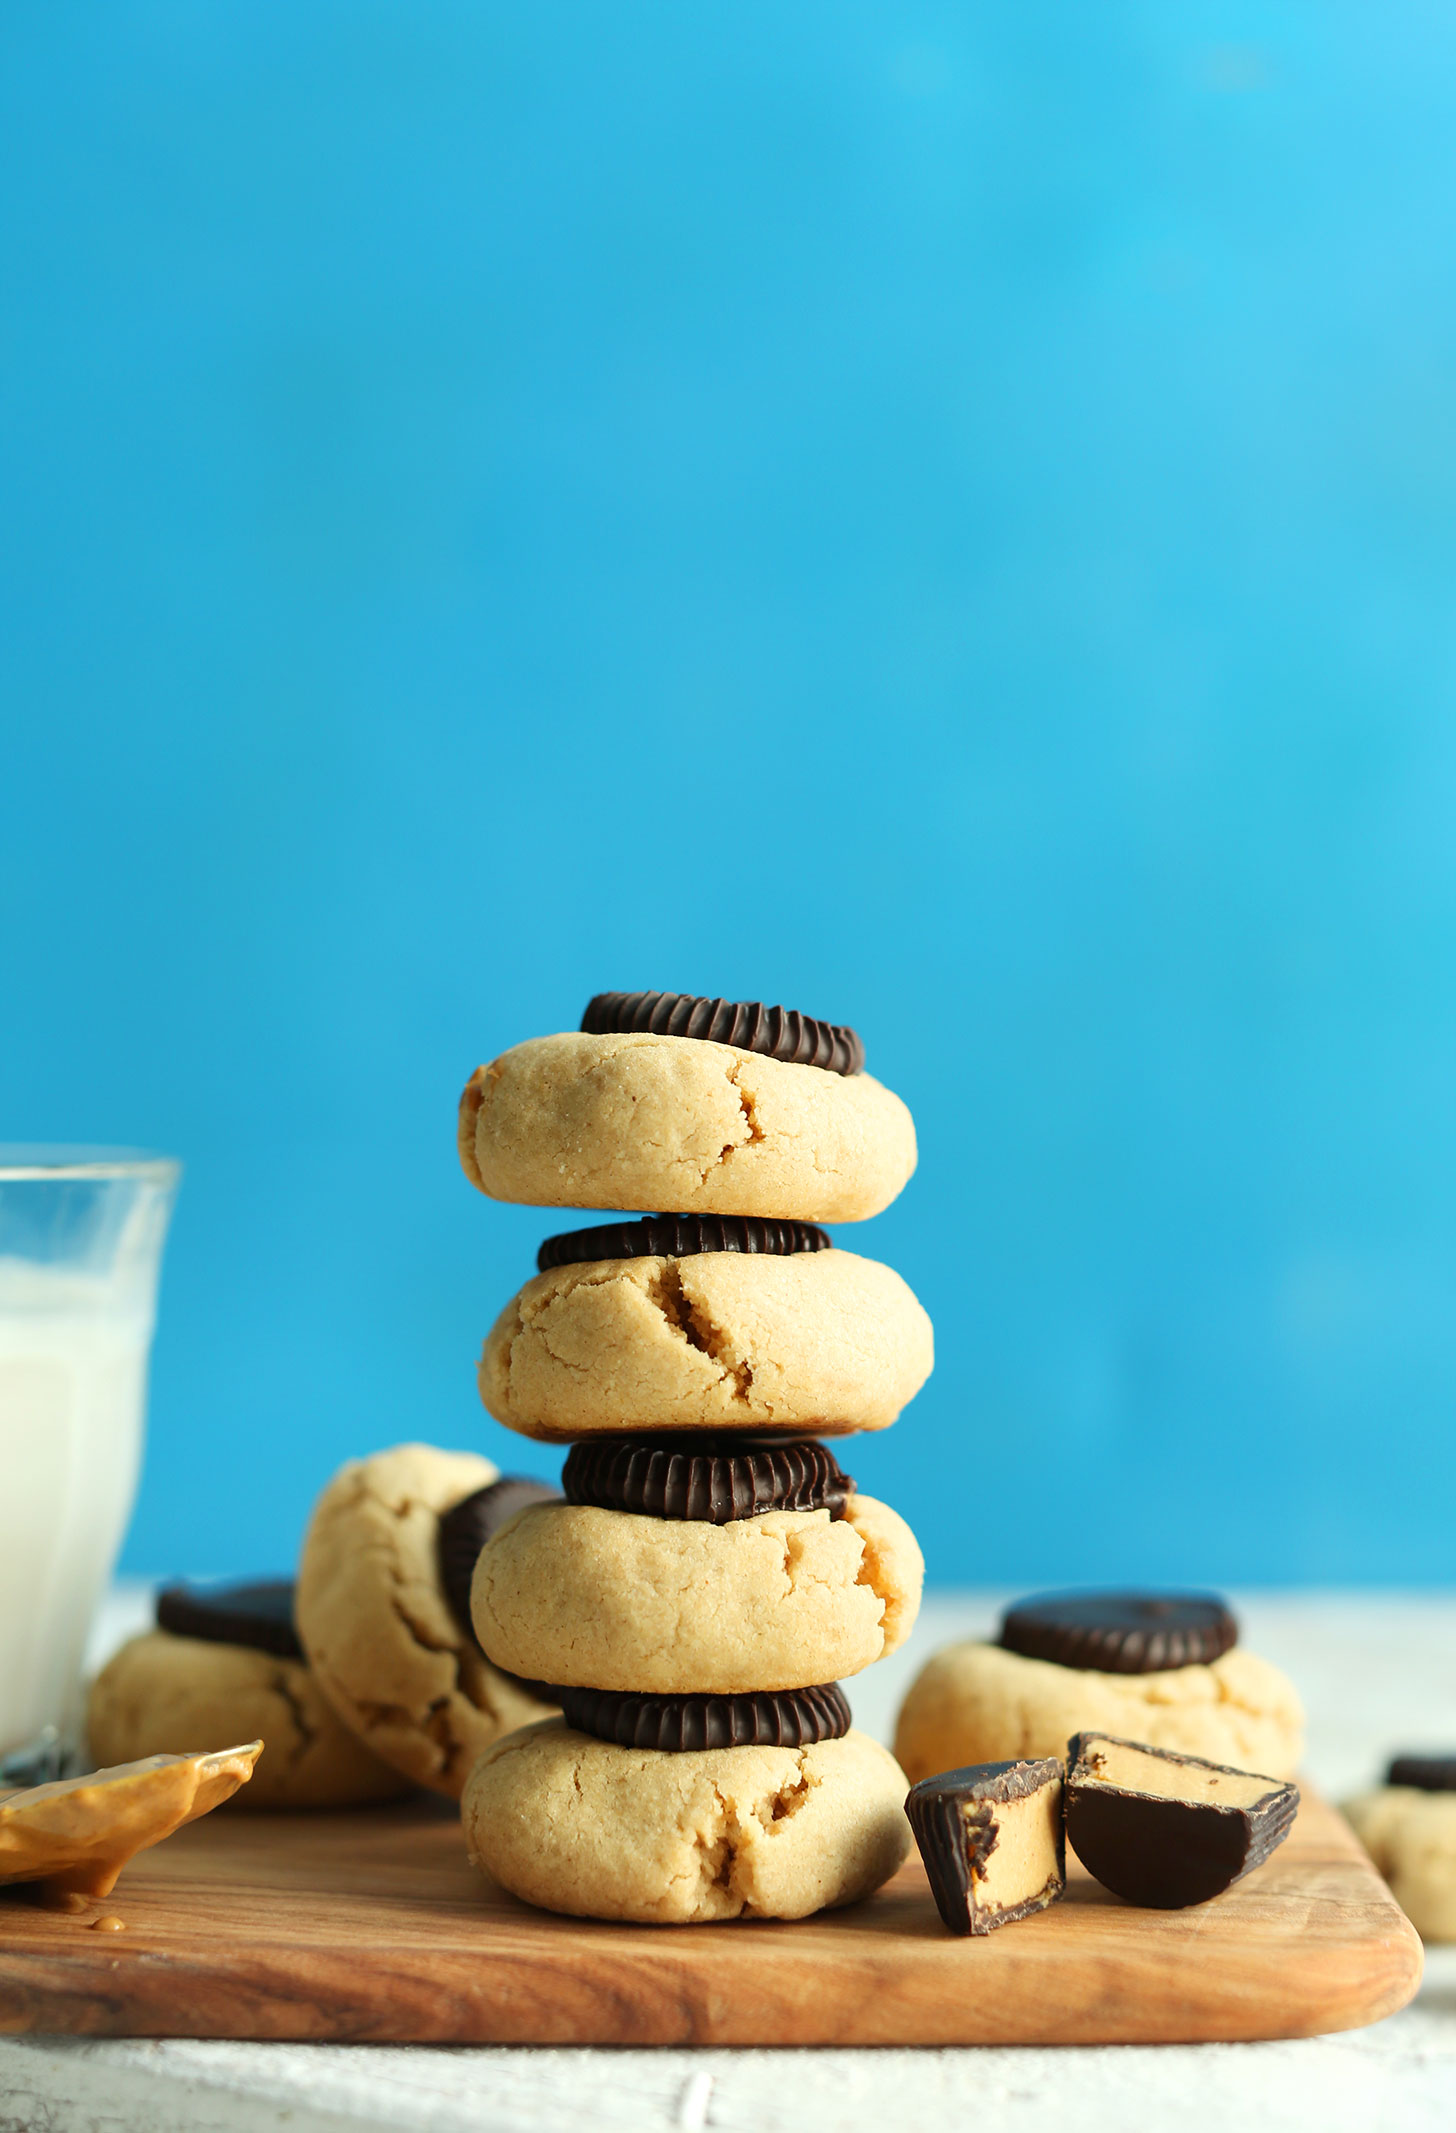 Cutting board with a glass of dairy-free milk and stack of our Peanut Butter Cup Cookies recipe